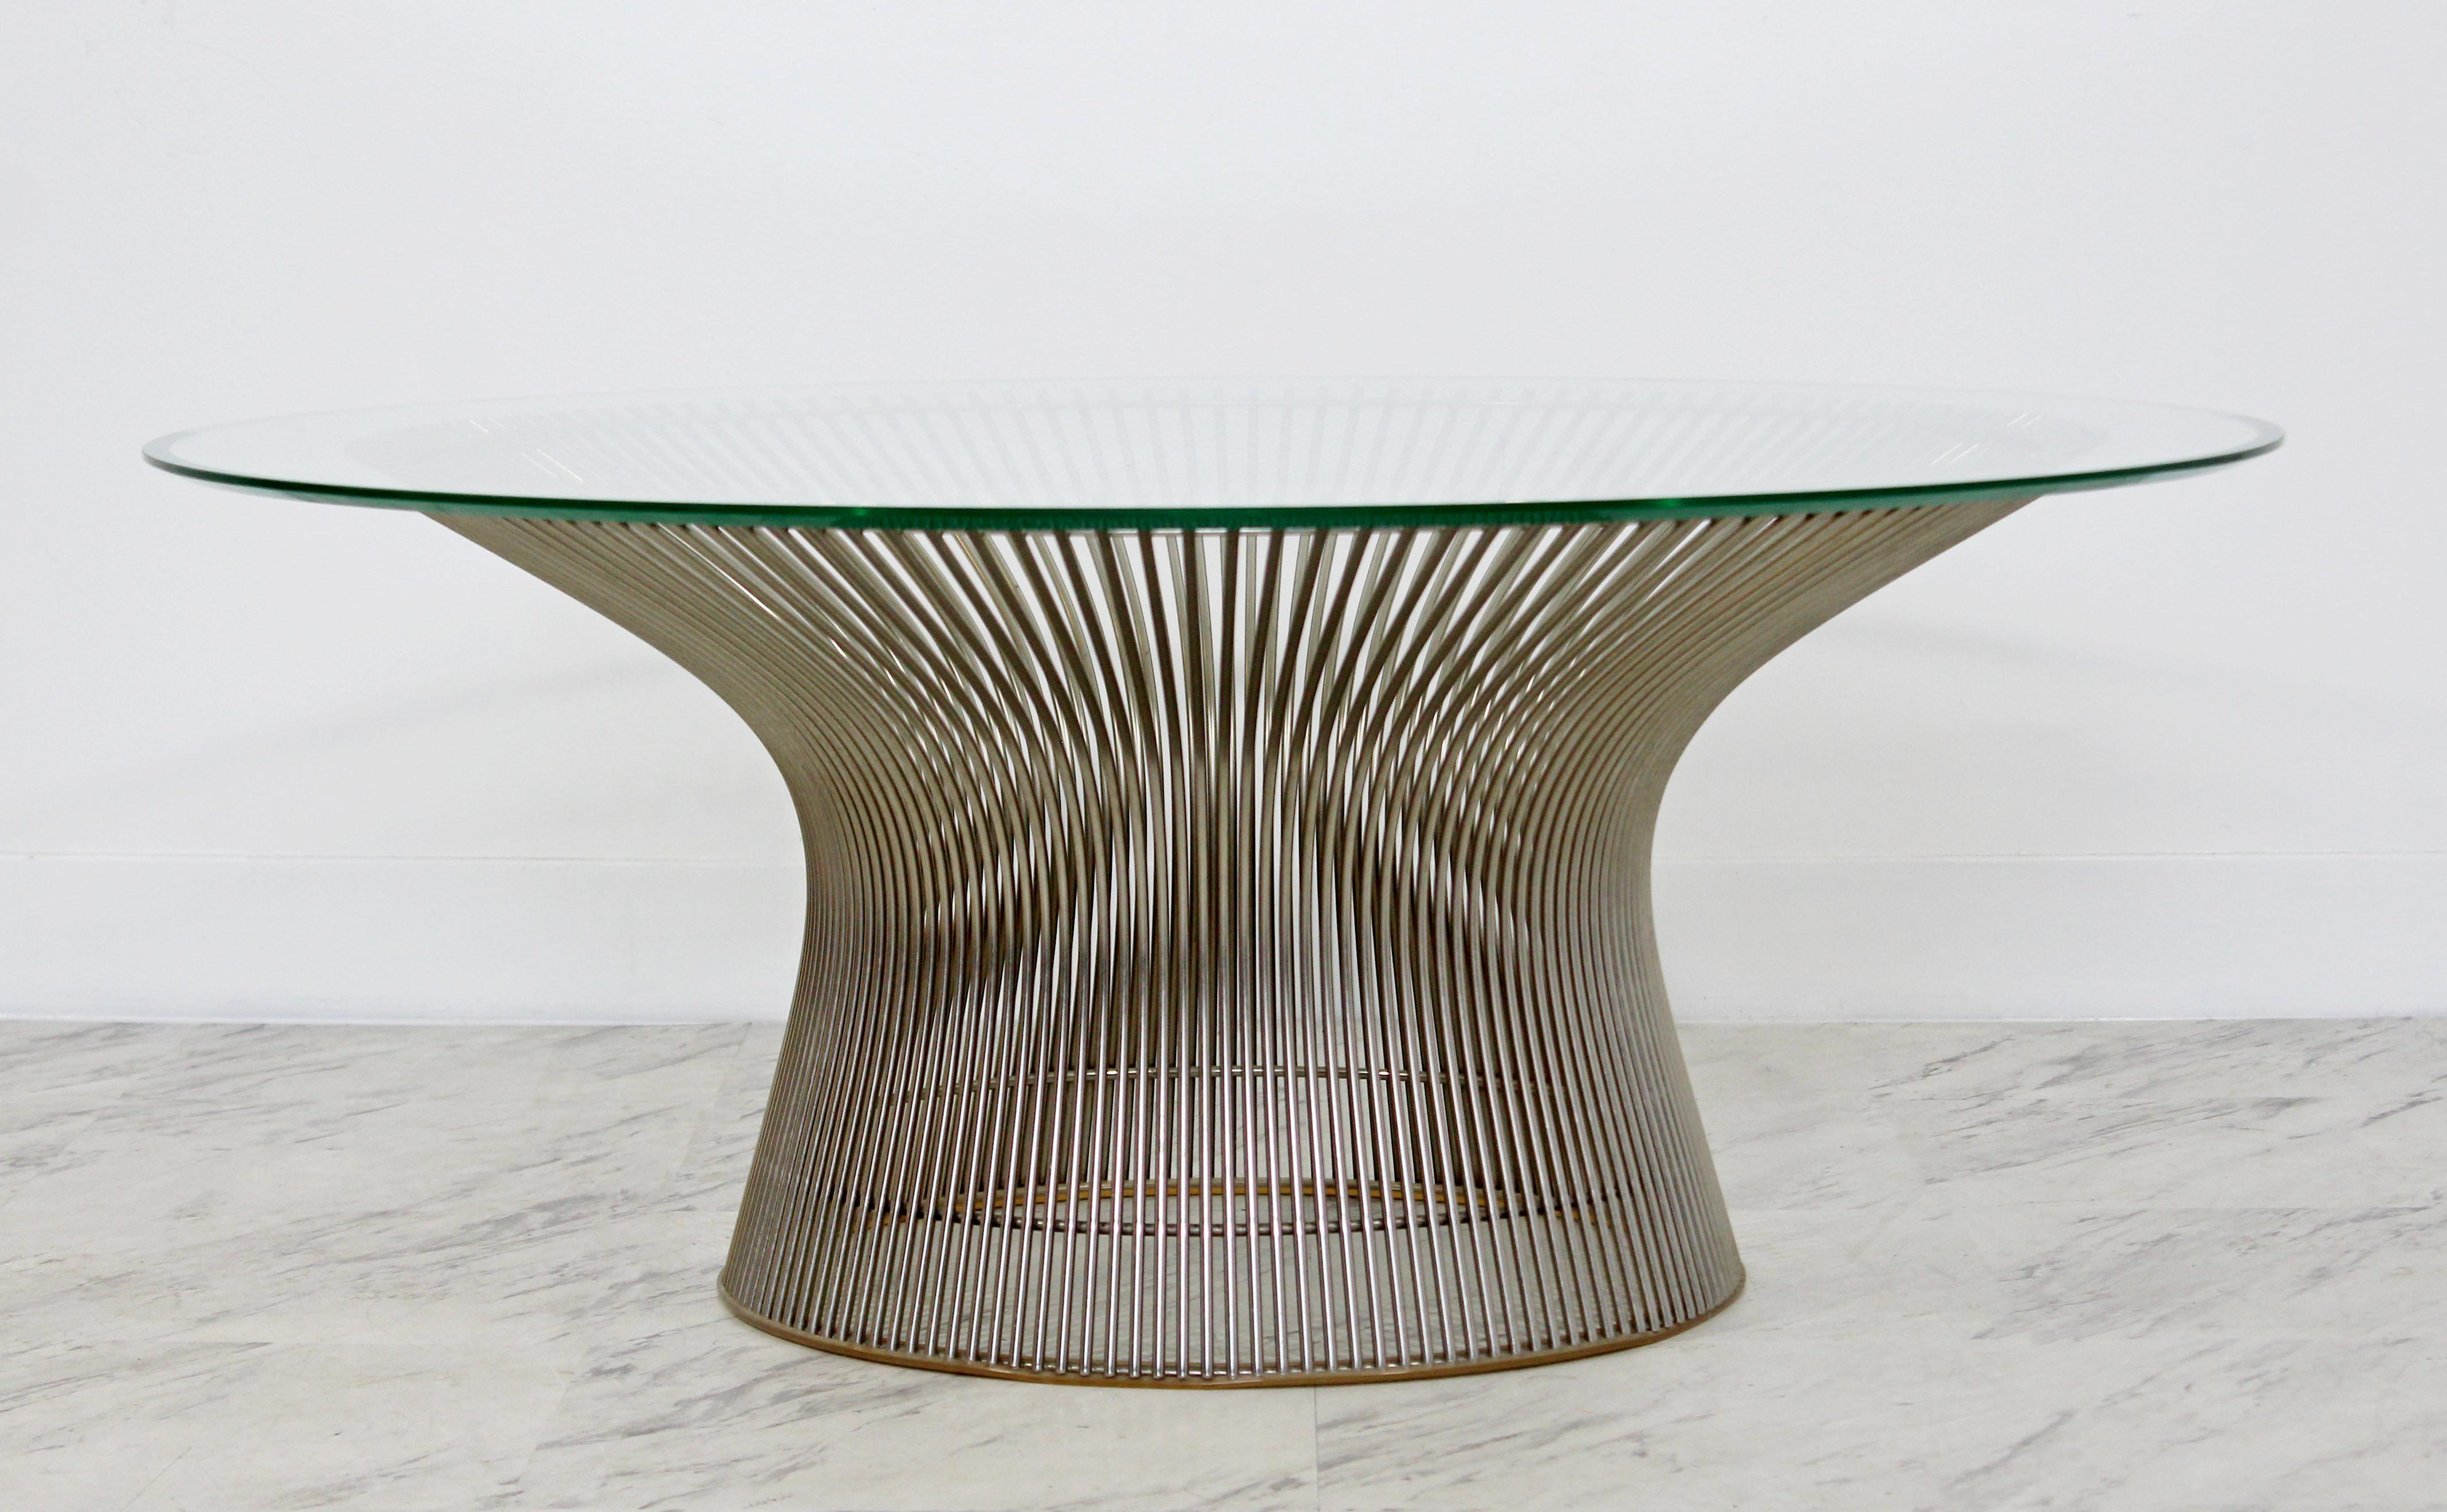 For your consideration is an original, steel wire coffee or cocktail table, with a round glass top, by Warren Platner for Knoll, circa 1966. In very good condition, with some minor scratches to the glass. The dimensions are 36